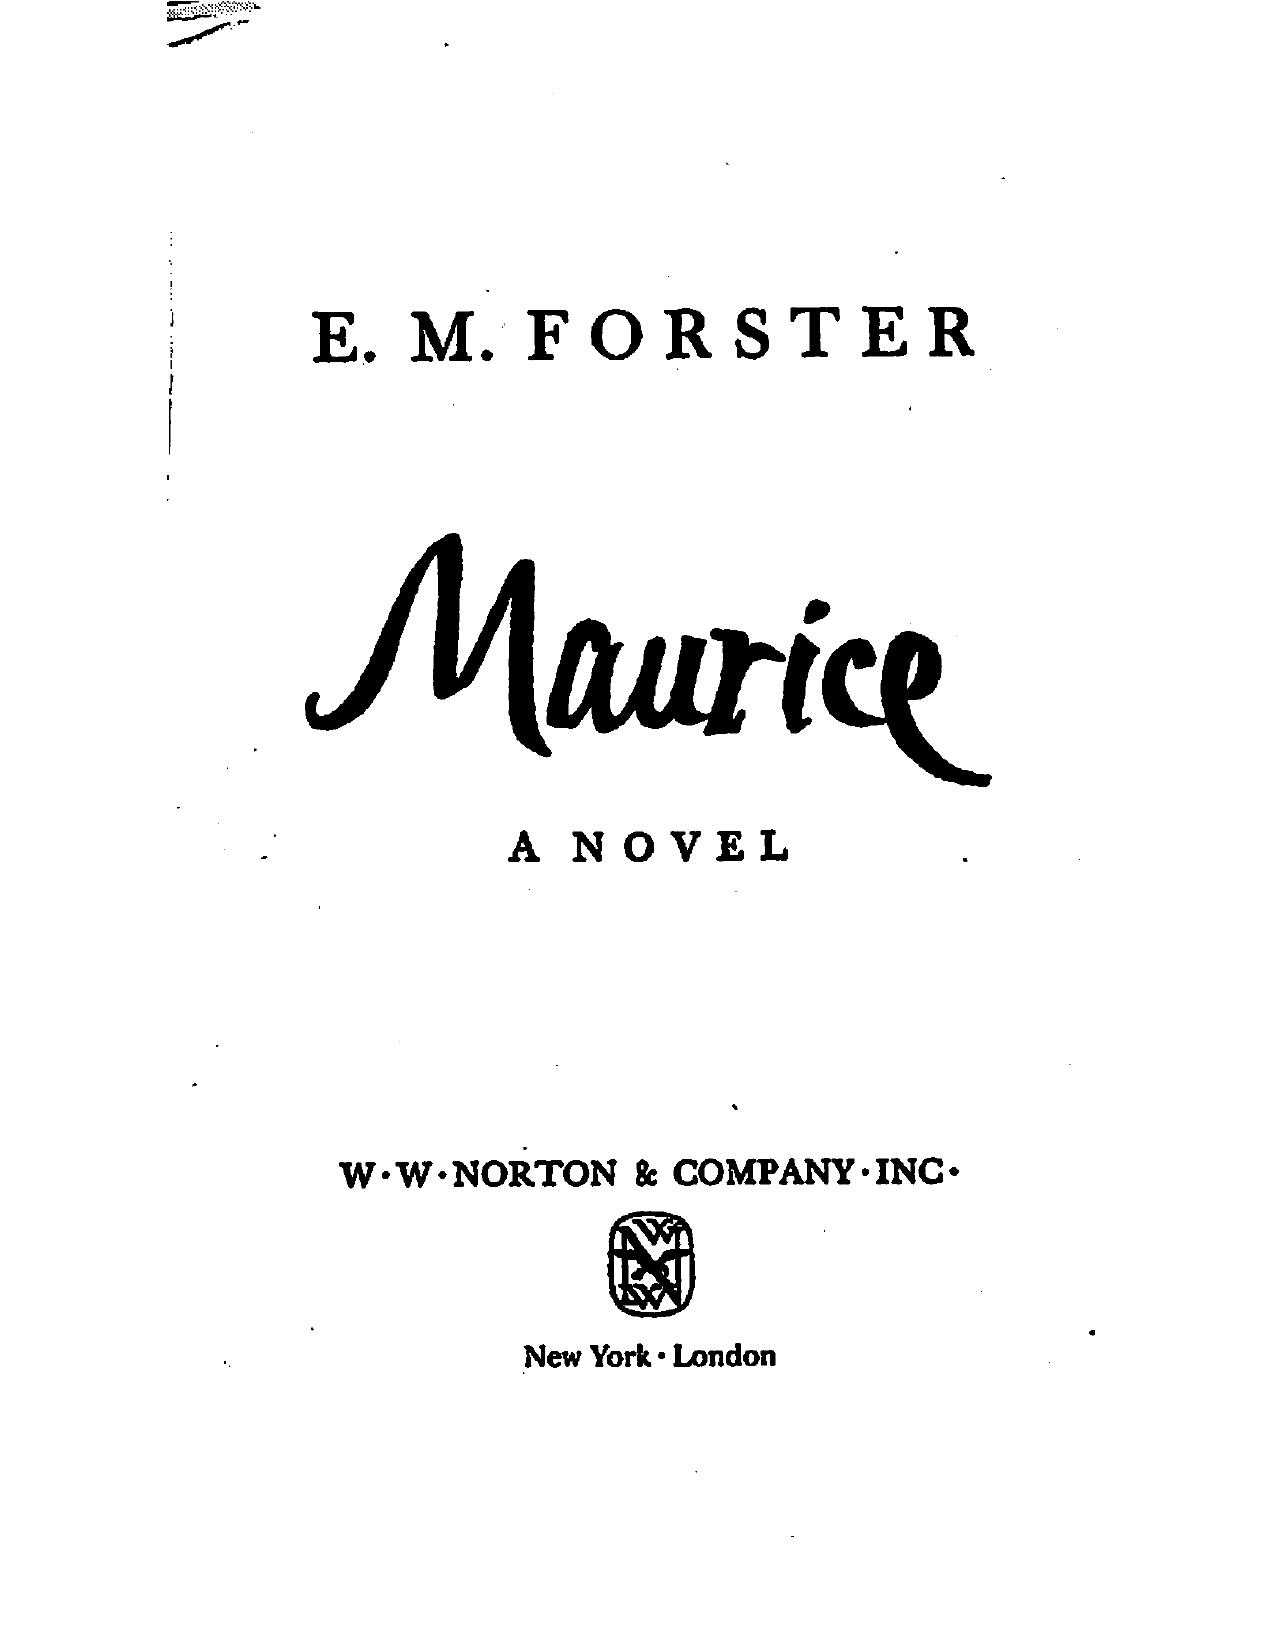 Maurice by E. M. Forster